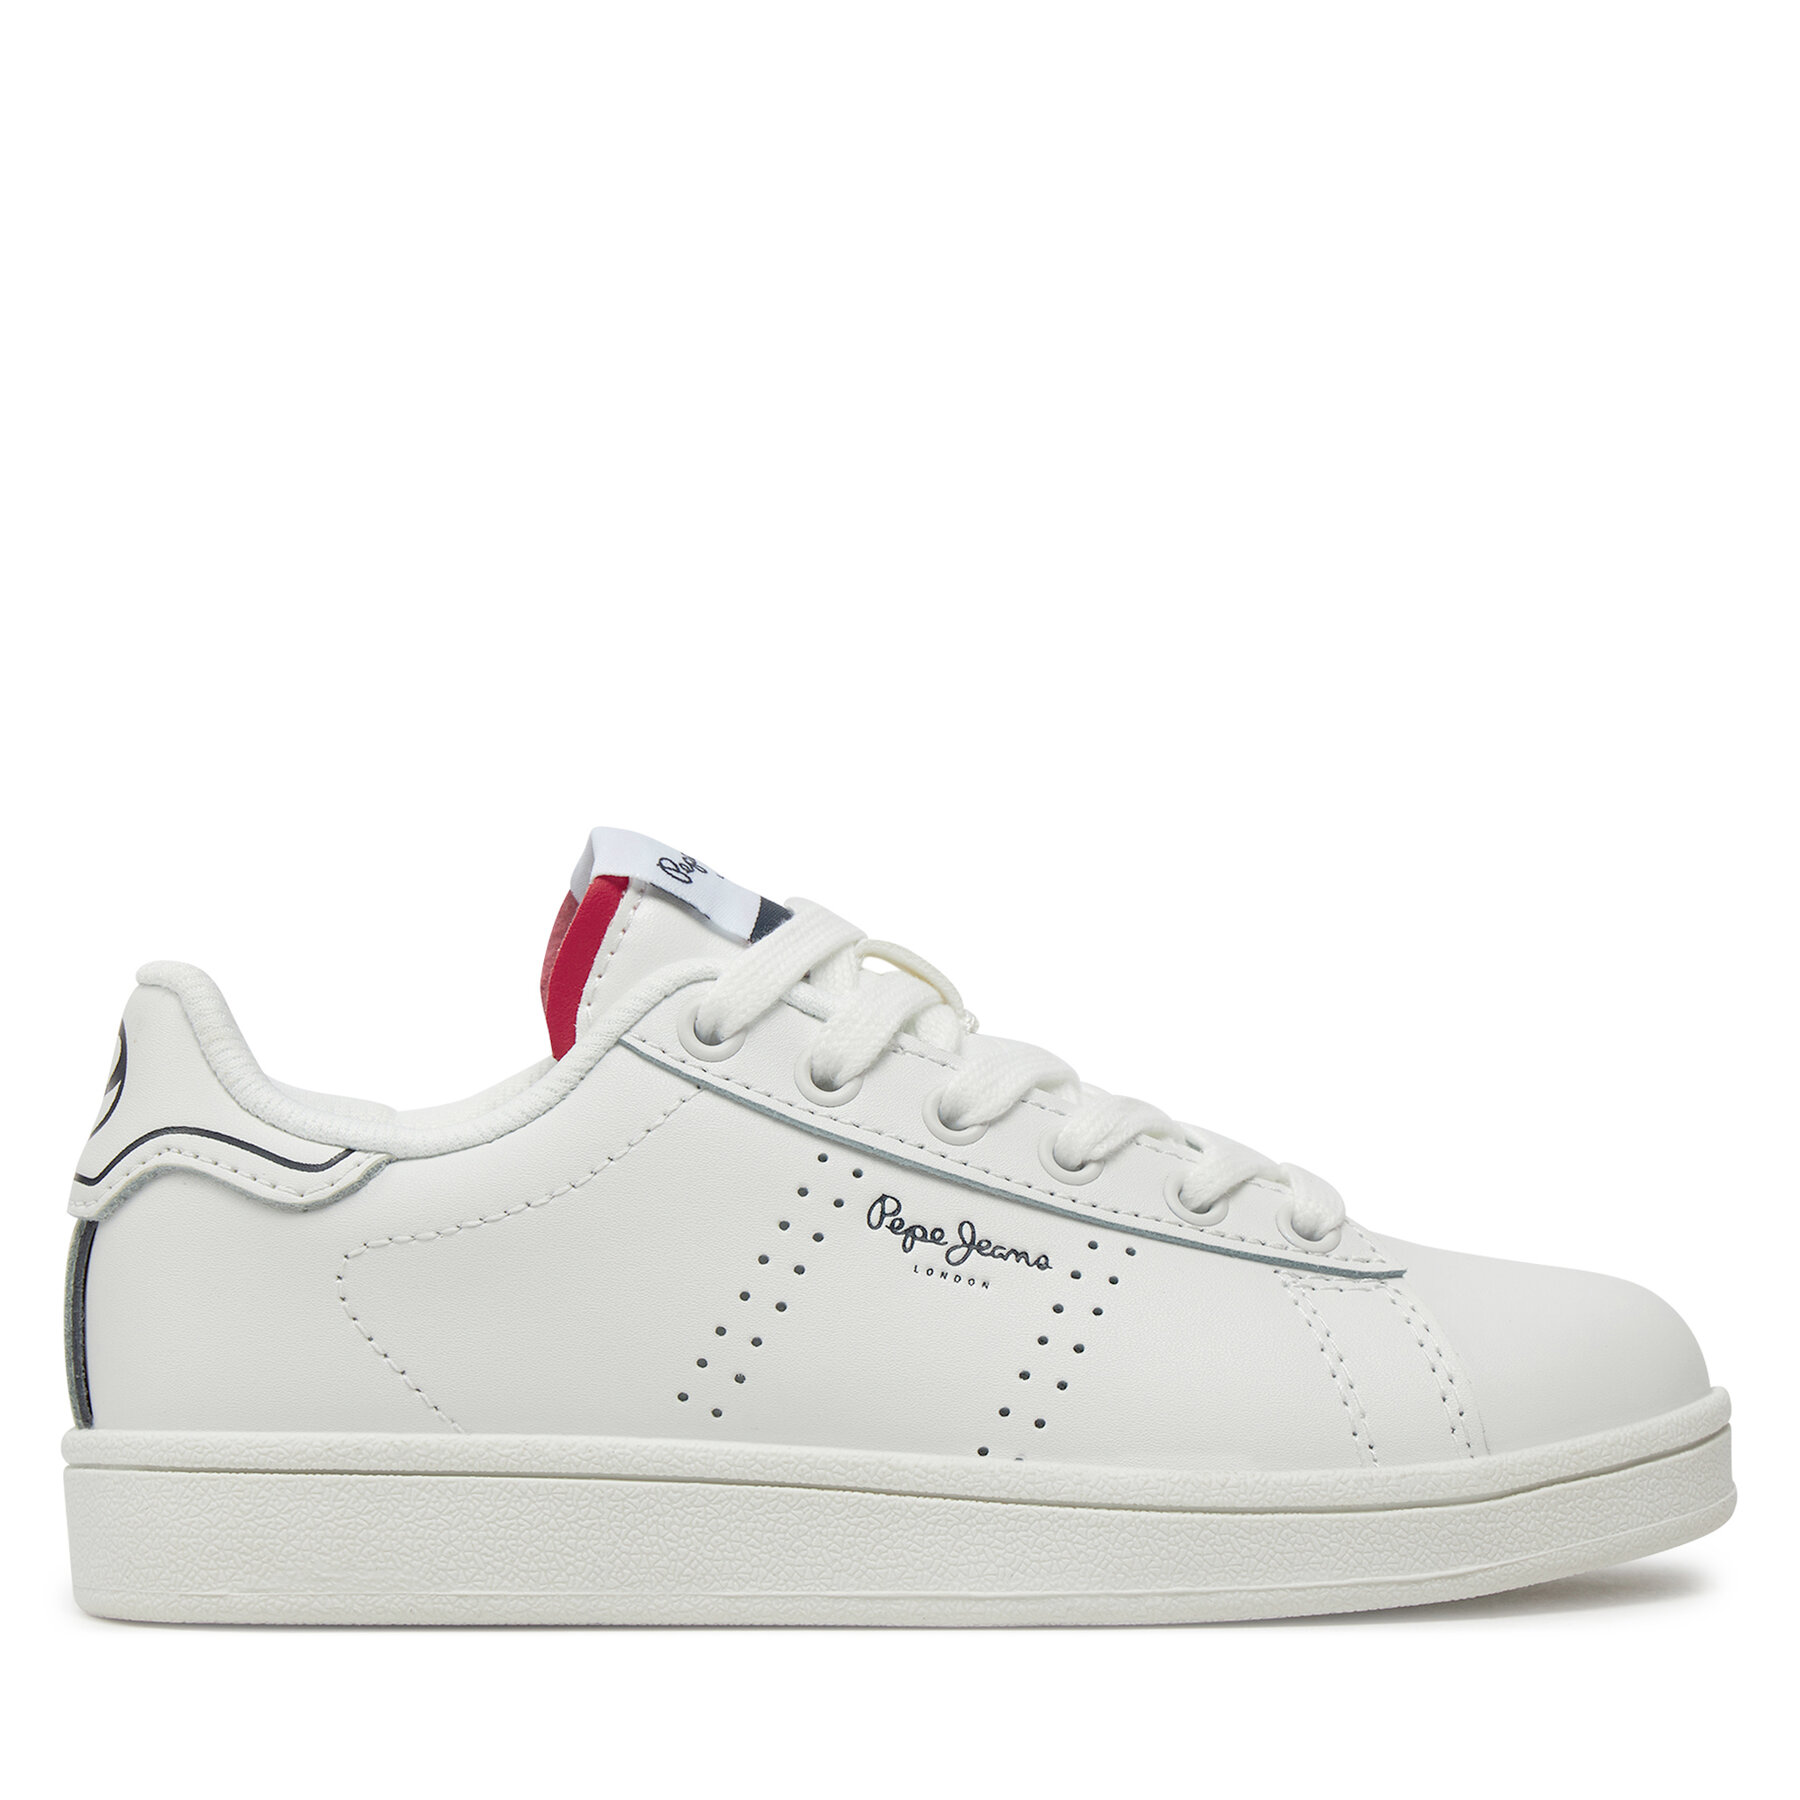 Sneakers Pepe Jeans Player Basic B PBS00001 White 800 von Pepe Jeans